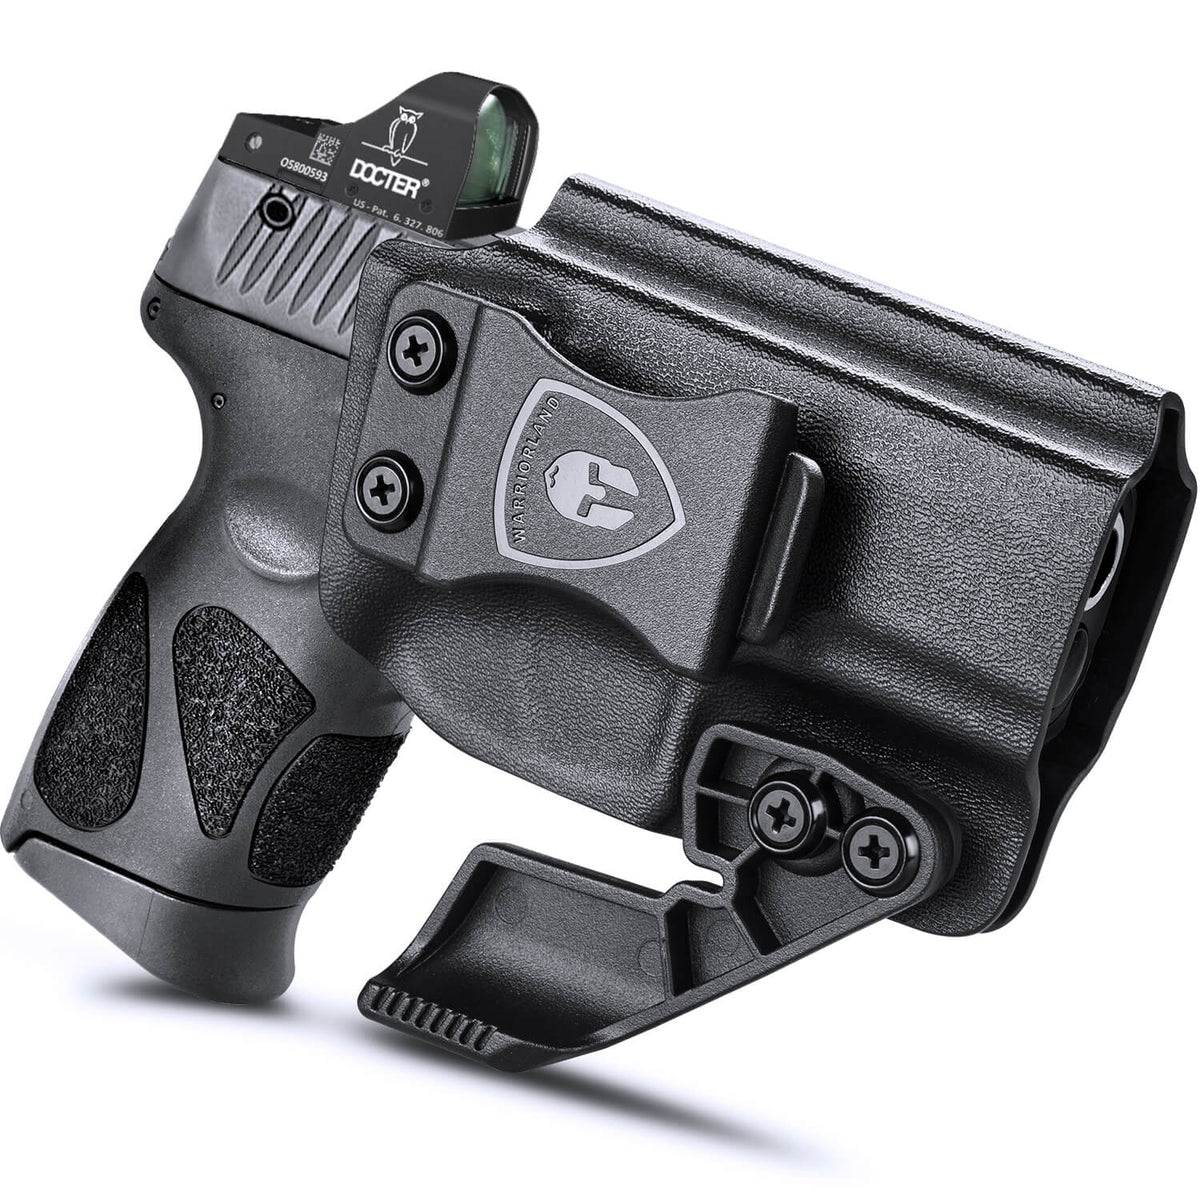 IWB Holster with Claw Taurus G2C G3C Millennium PT111 G2 PT140 9mm Red Dot Optics Cut Appendix Carry Trigger Guard Holsters for fat guys | WARRIORLAND